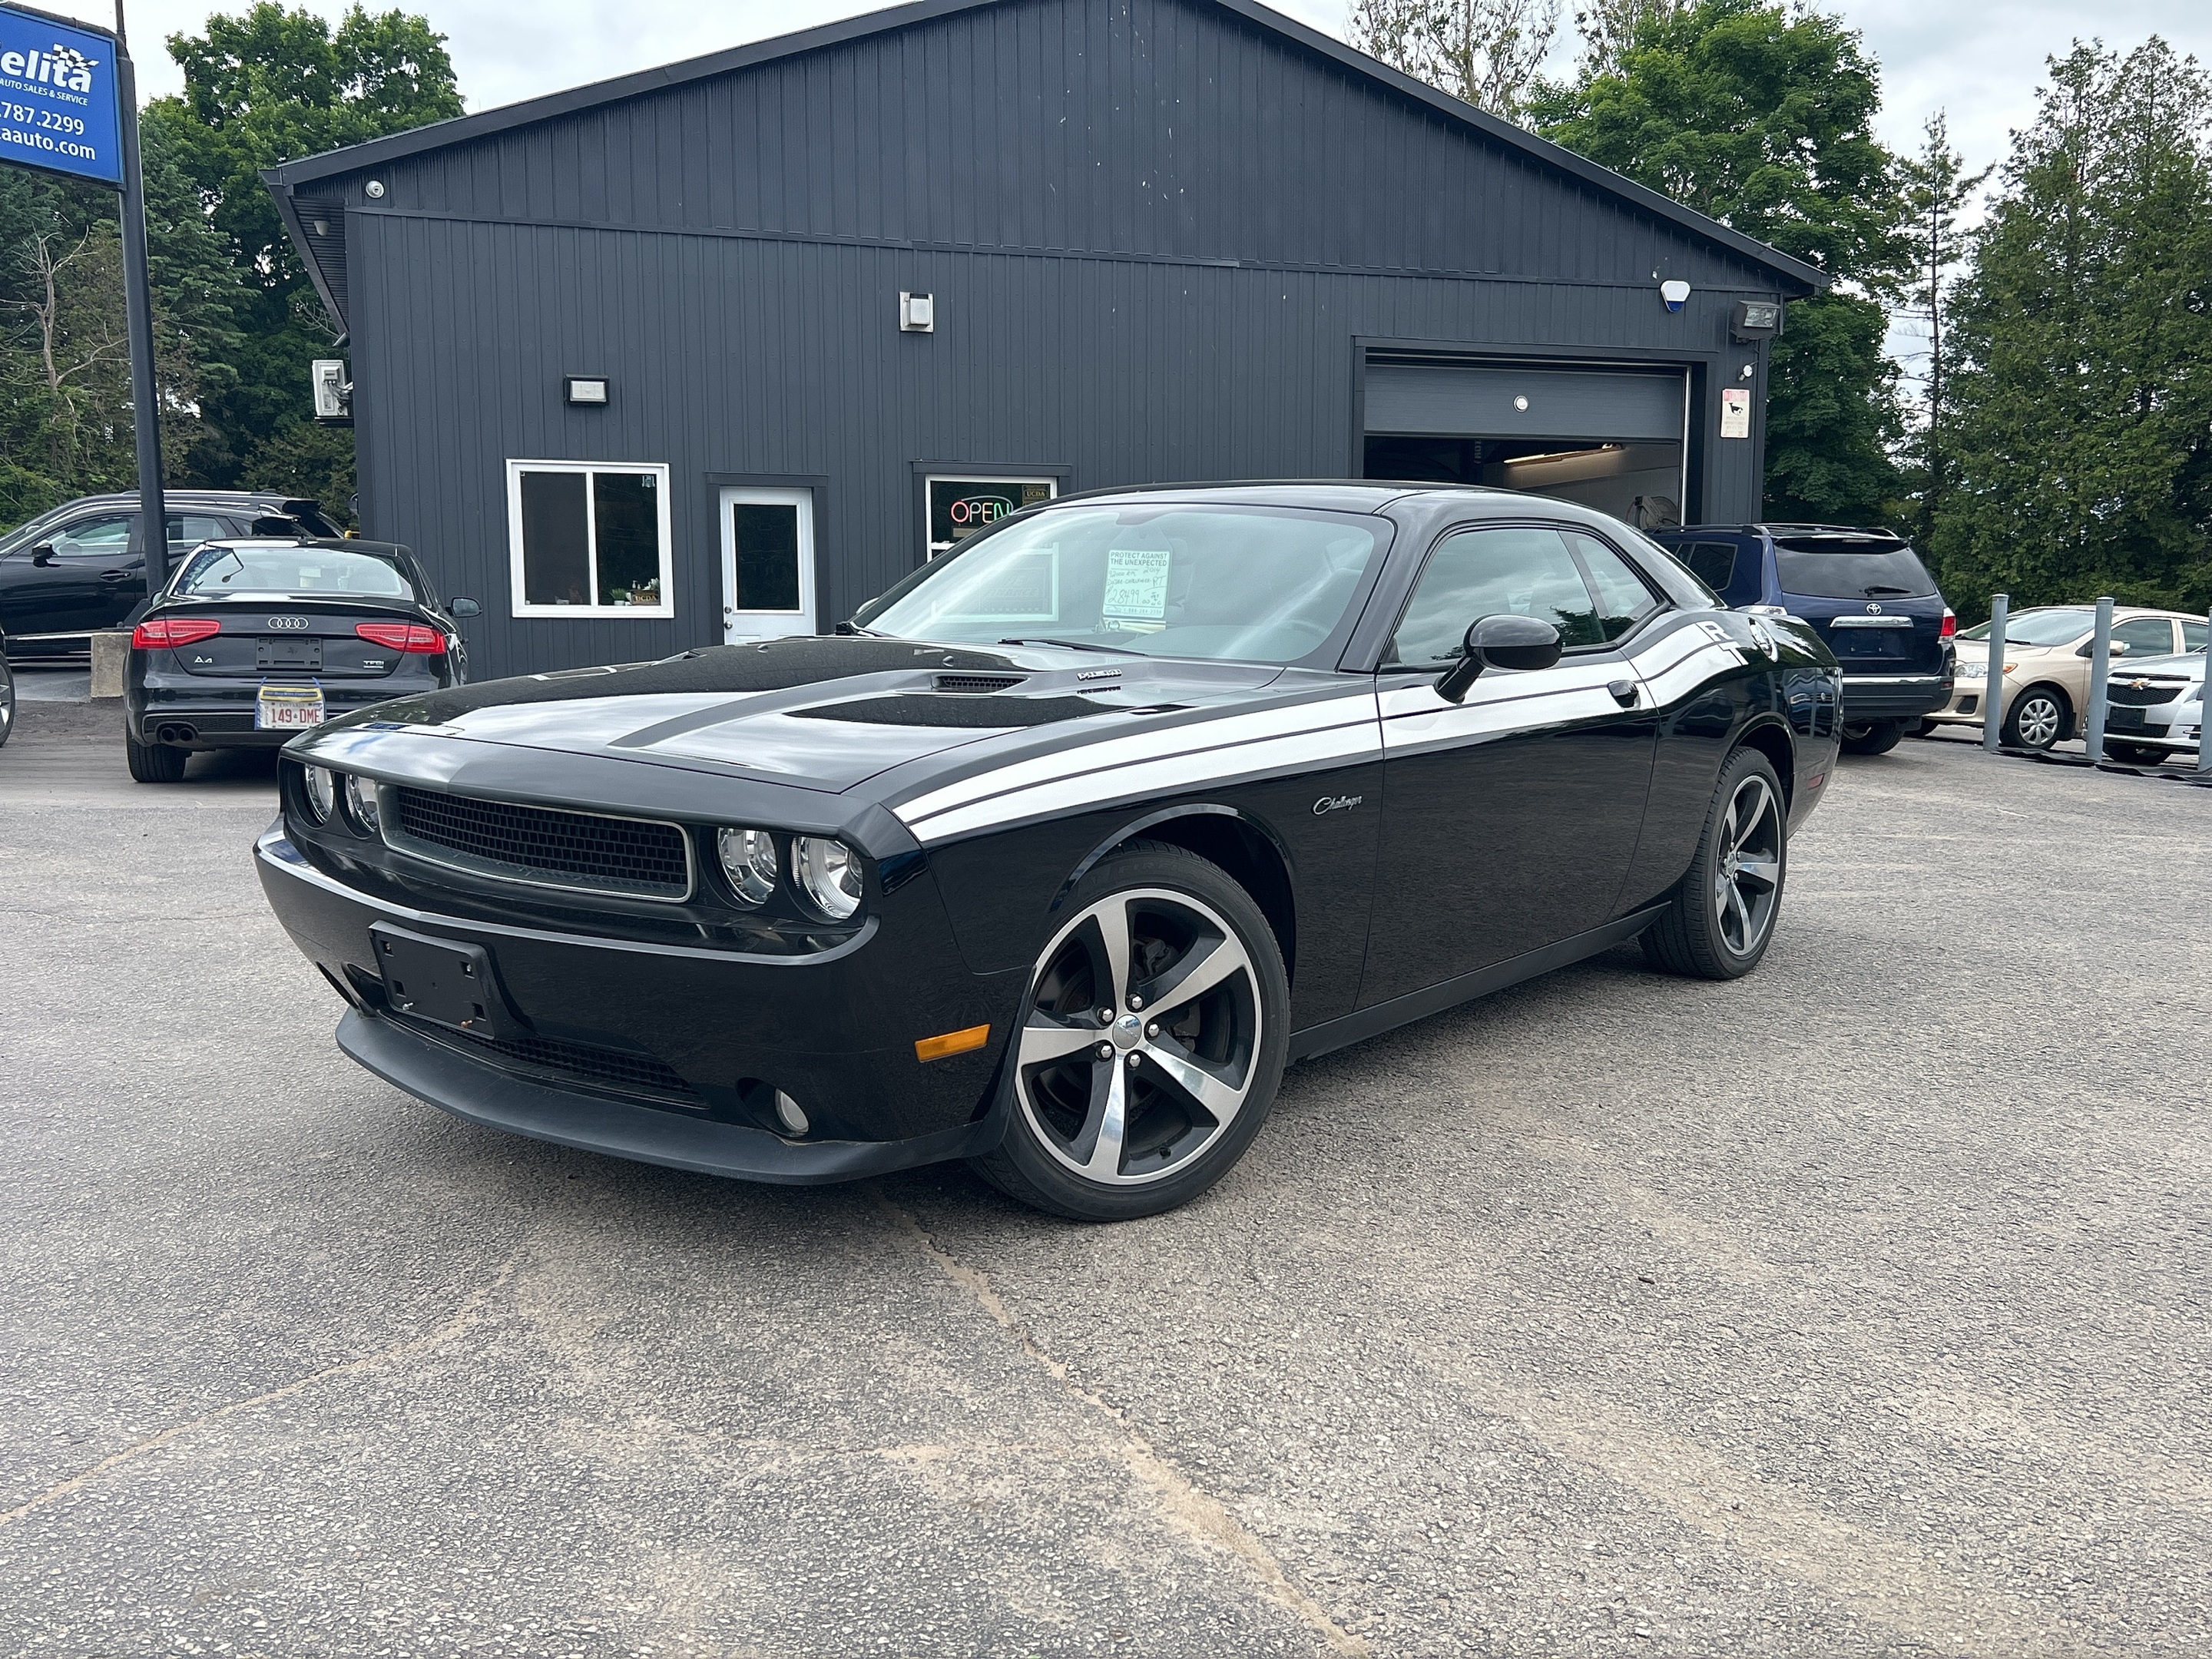 2014 Dodge Challenger R/T CLASSIC, SUEDE/LEATHER R/T!!!!